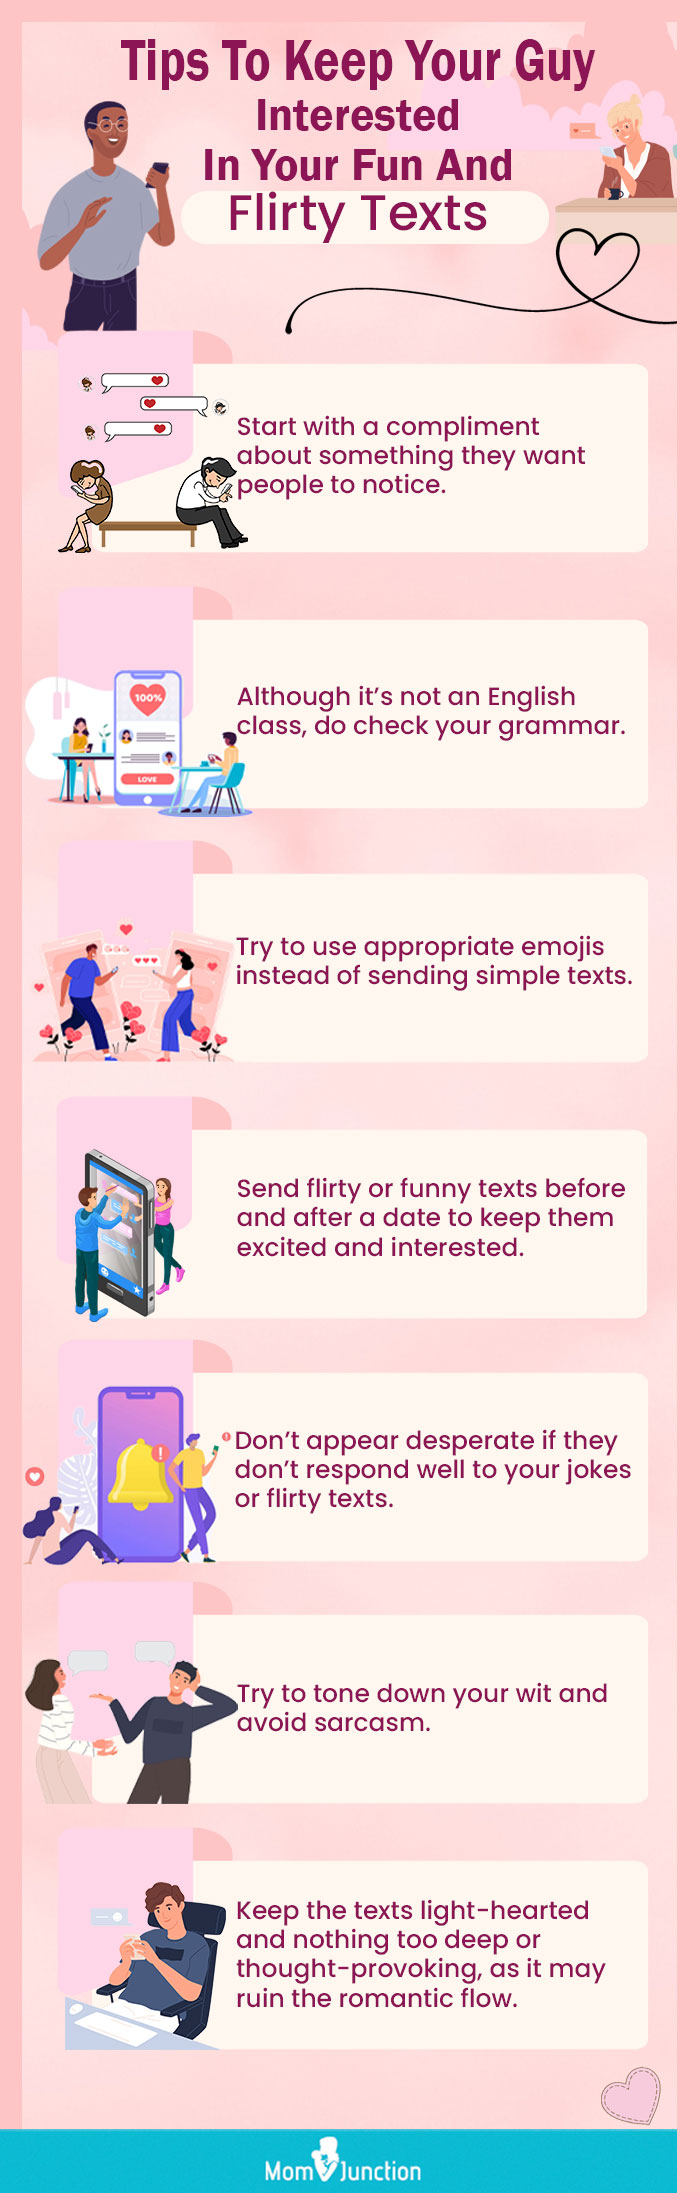 how to make sure your flirty texts work [infographic]